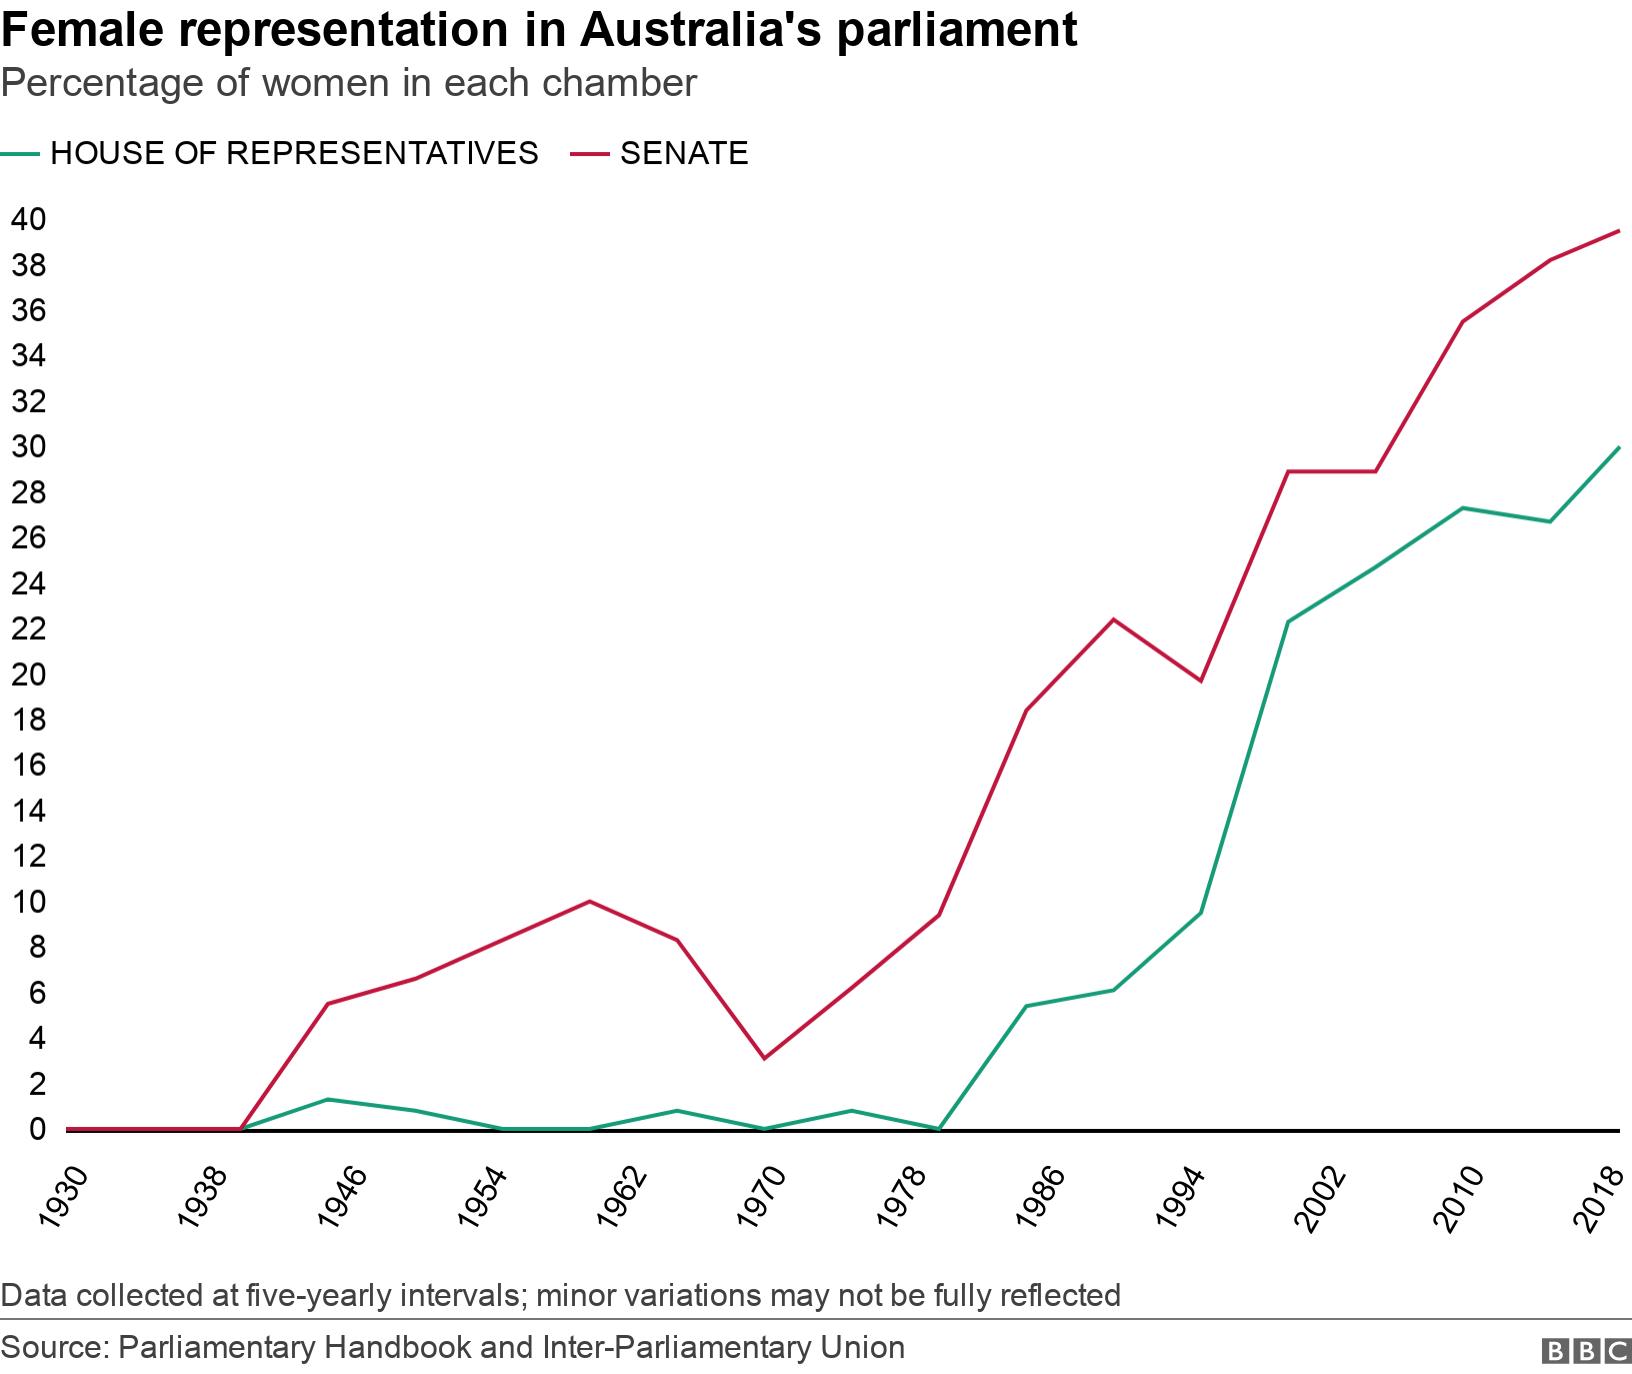 Female representation in Australia's parliament. Percentage of women in  each chamber. 
A green line shows the proportion of women in the House of Representatives grow from 0% in 1930, stay under 5% from 1943-1982, and increase to 30% by 2019.
A red line shows the proportion of women in the Senate increase from 5% to almost 40% from 1943 to 2018. Data collected at five-yearly intervals; minor variations may not be fully reflected.